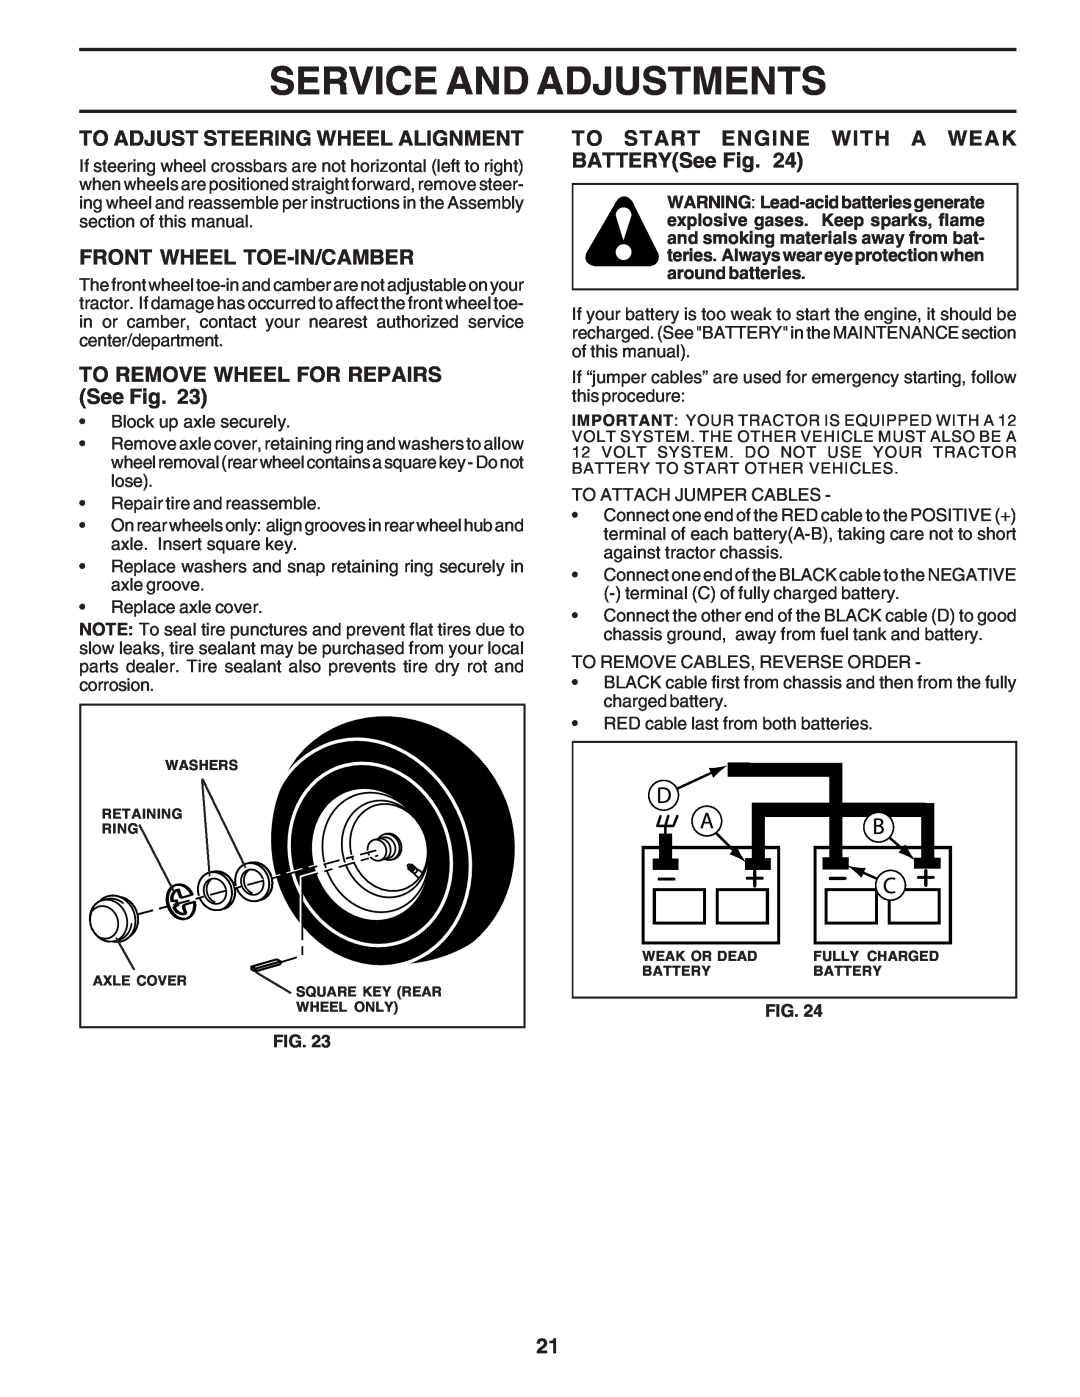 Poulan PC1538B manual To Adjust Steering Wheel Alignment, Front Wheel Toe-In/Camber, TO REMOVE WHEEL FOR REPAIRS See Fig 